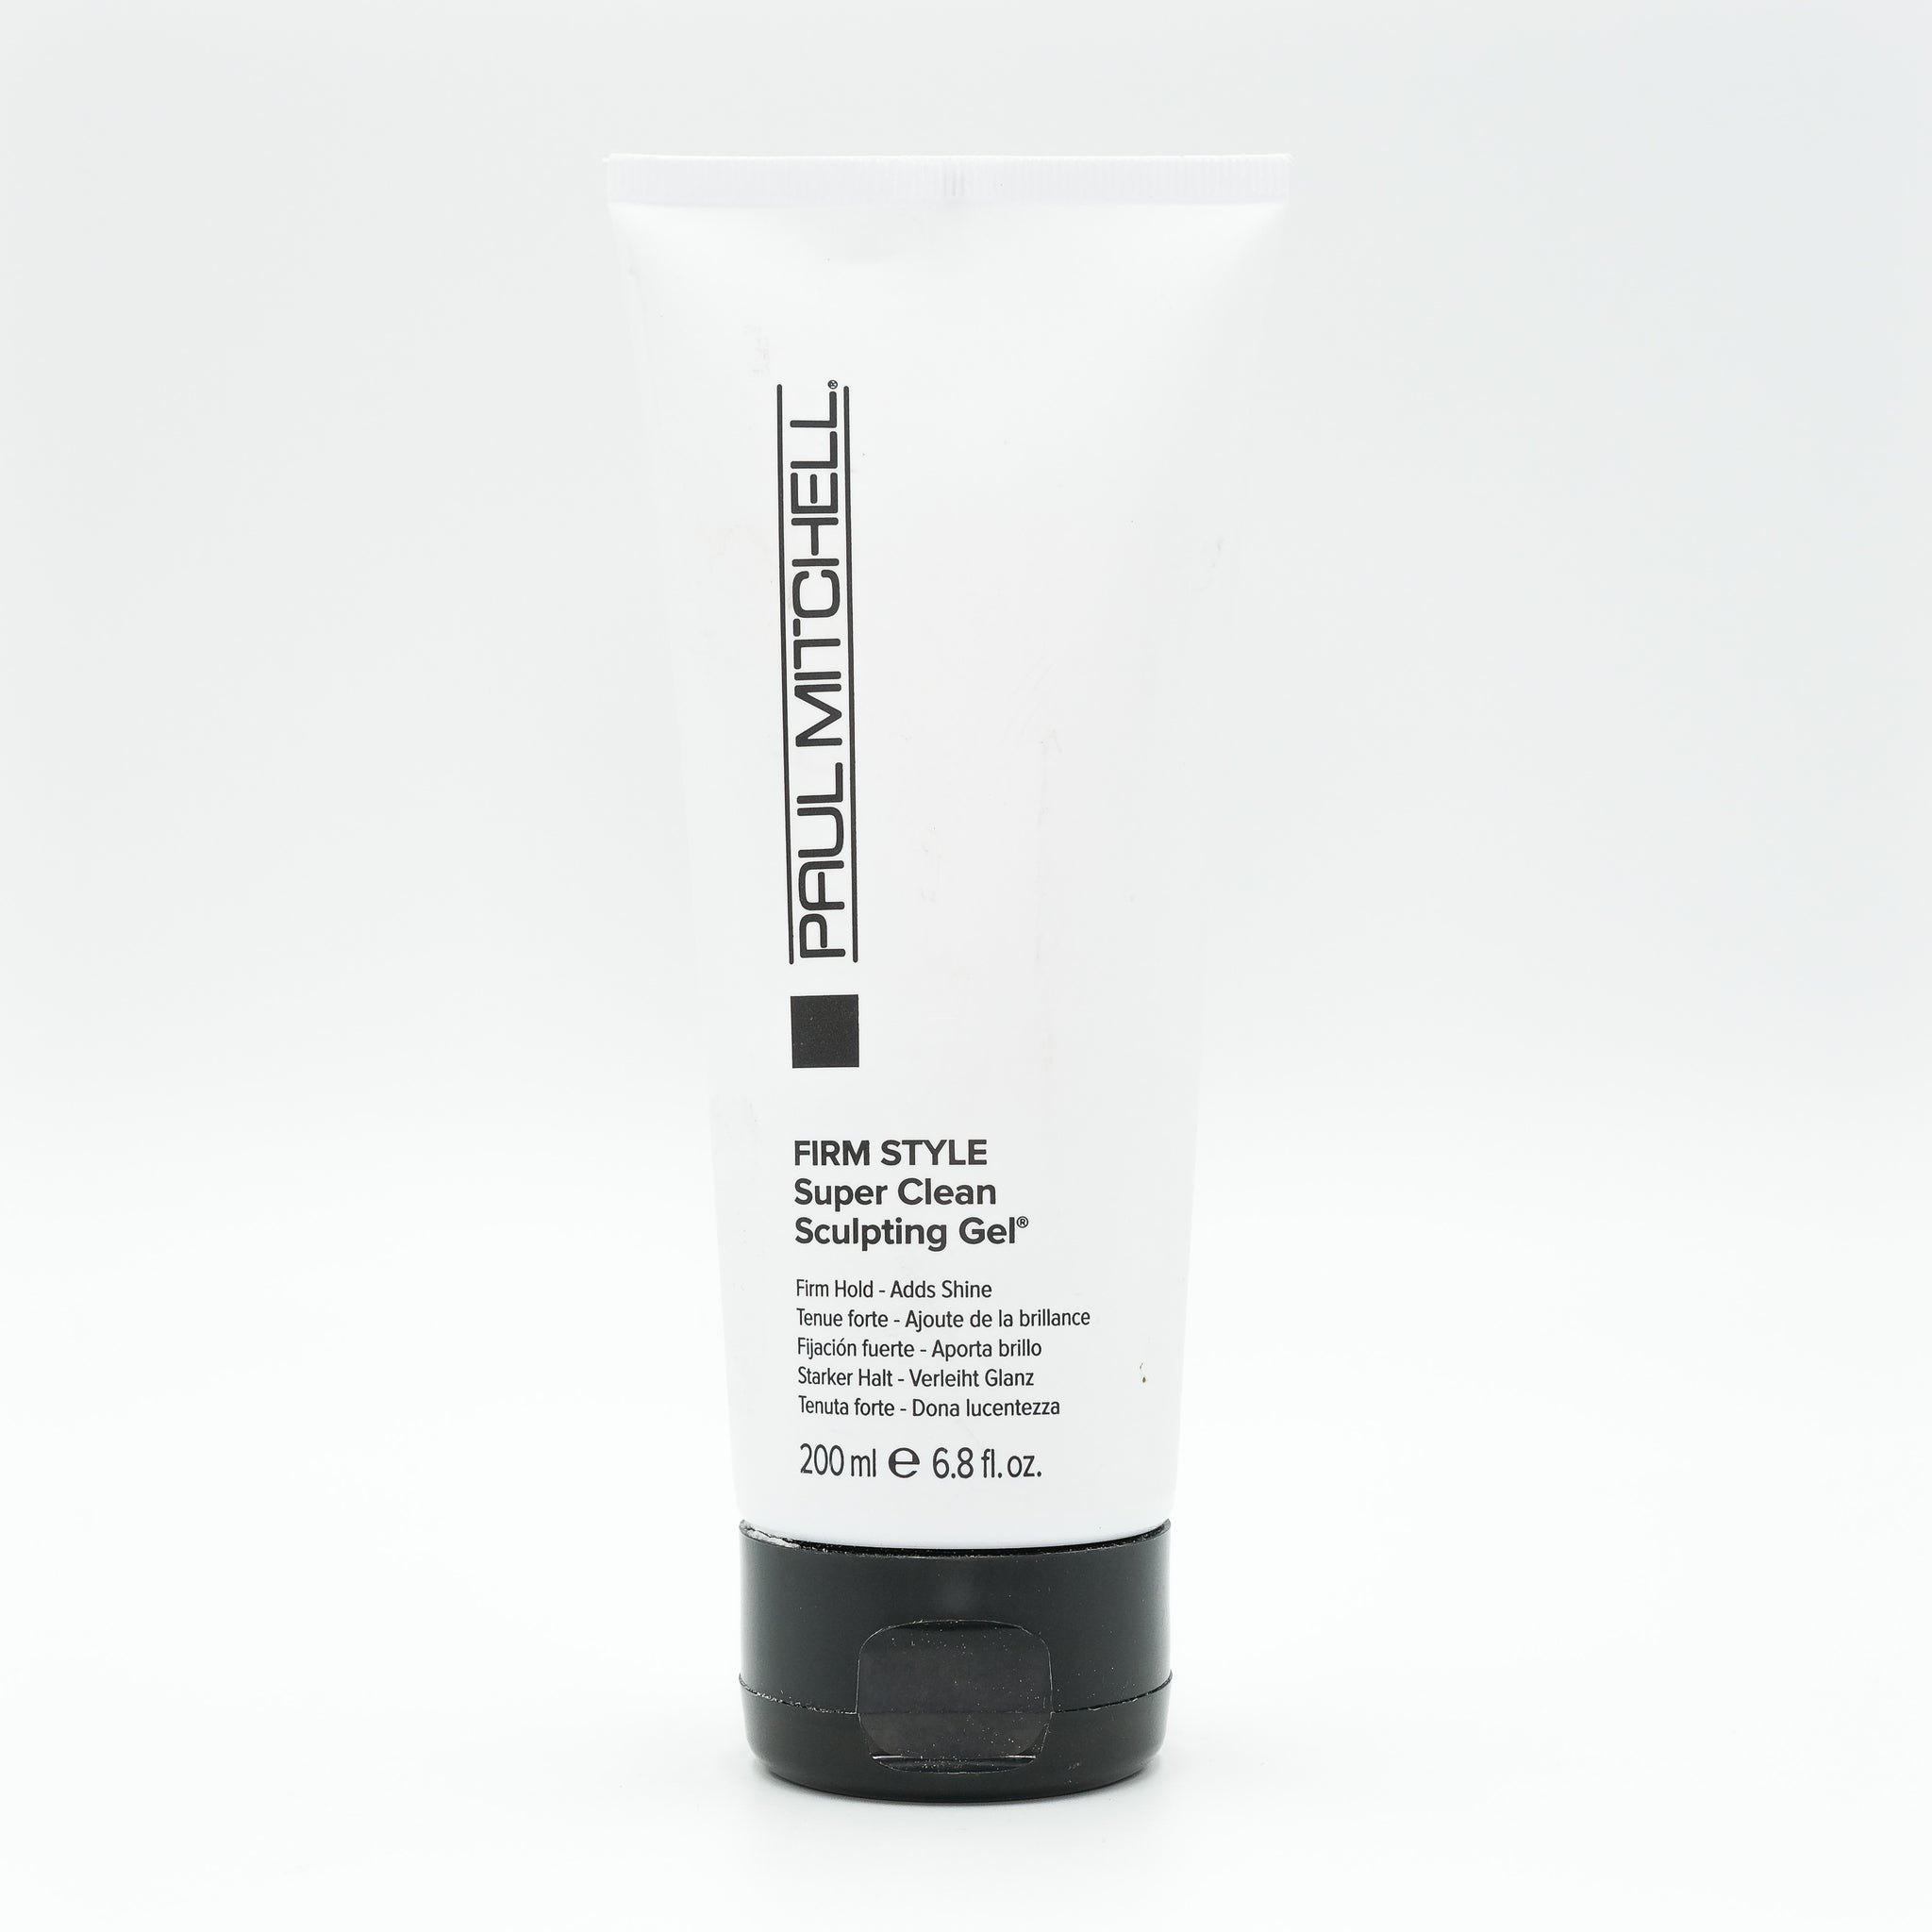 PAUL MITCHELL Firm Style Super Clean Sculpting Gel 6.8 oz (pack of 3)